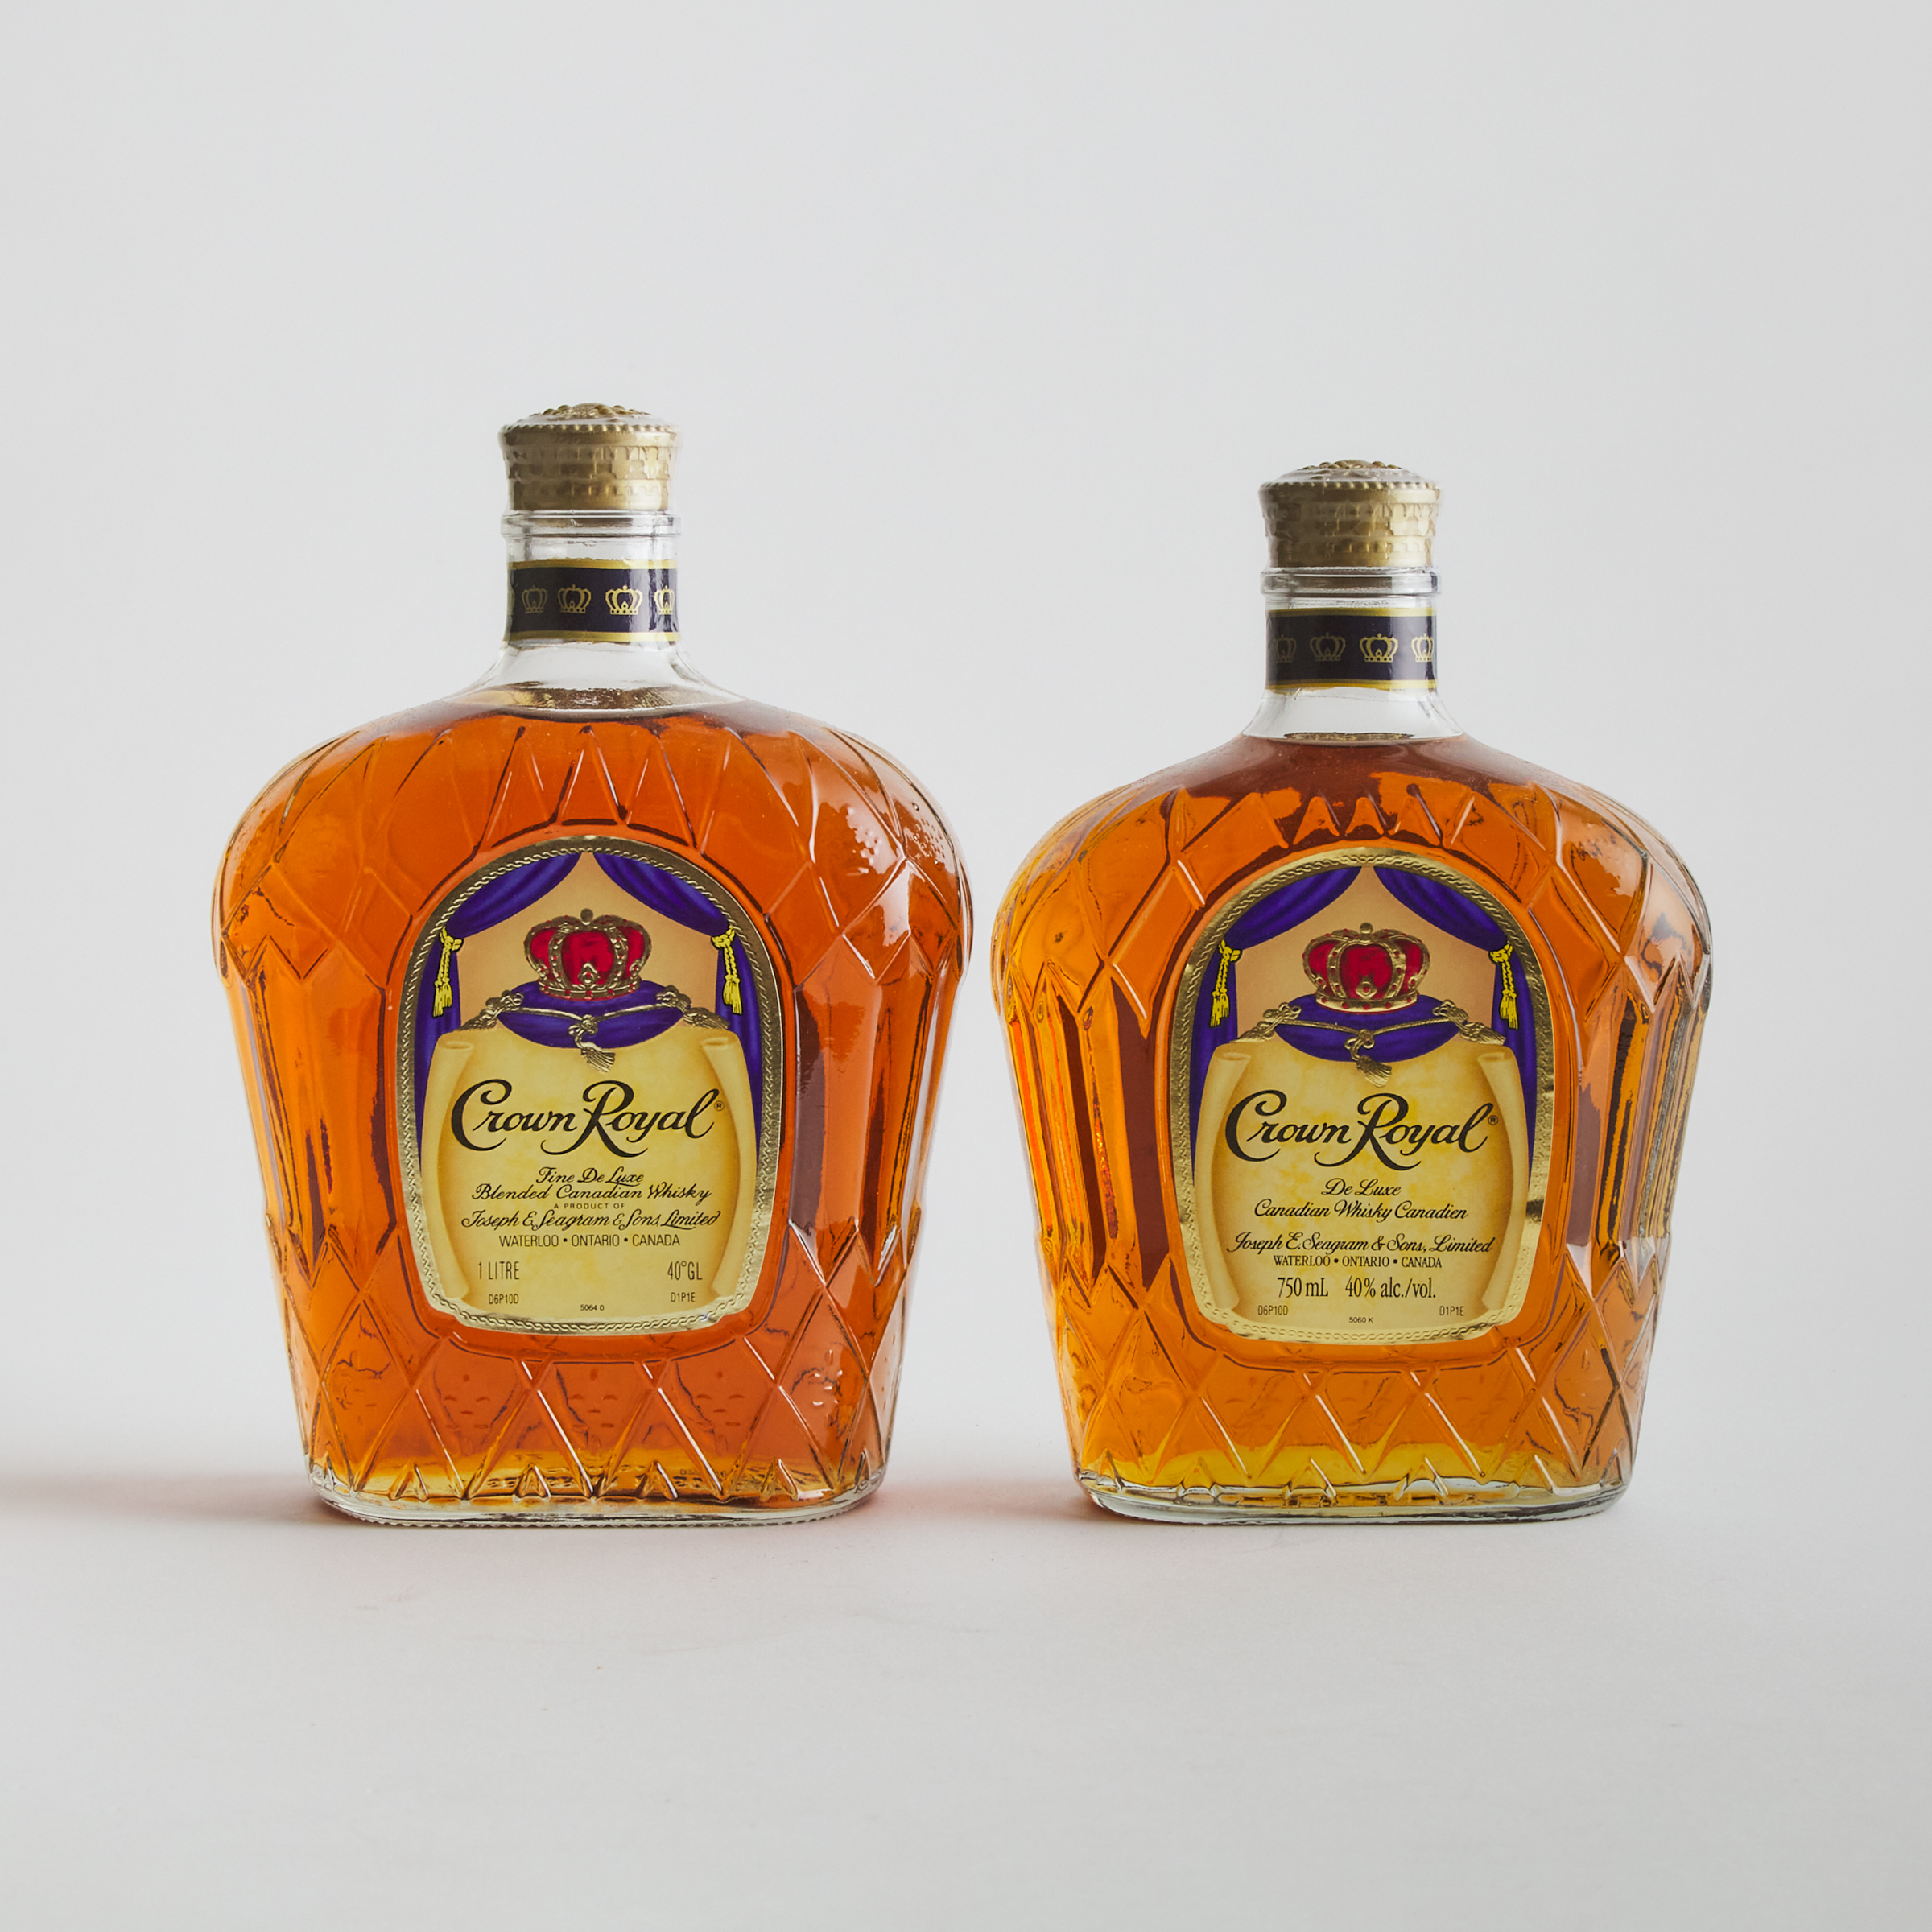 CROWN ROYAL FINE DELUXE CANADIAN WHISKY (ONE 750 ML)
CROWN ROYAL FINE DELUXE CANADIAN WHISKY (ONE 1140 ML)